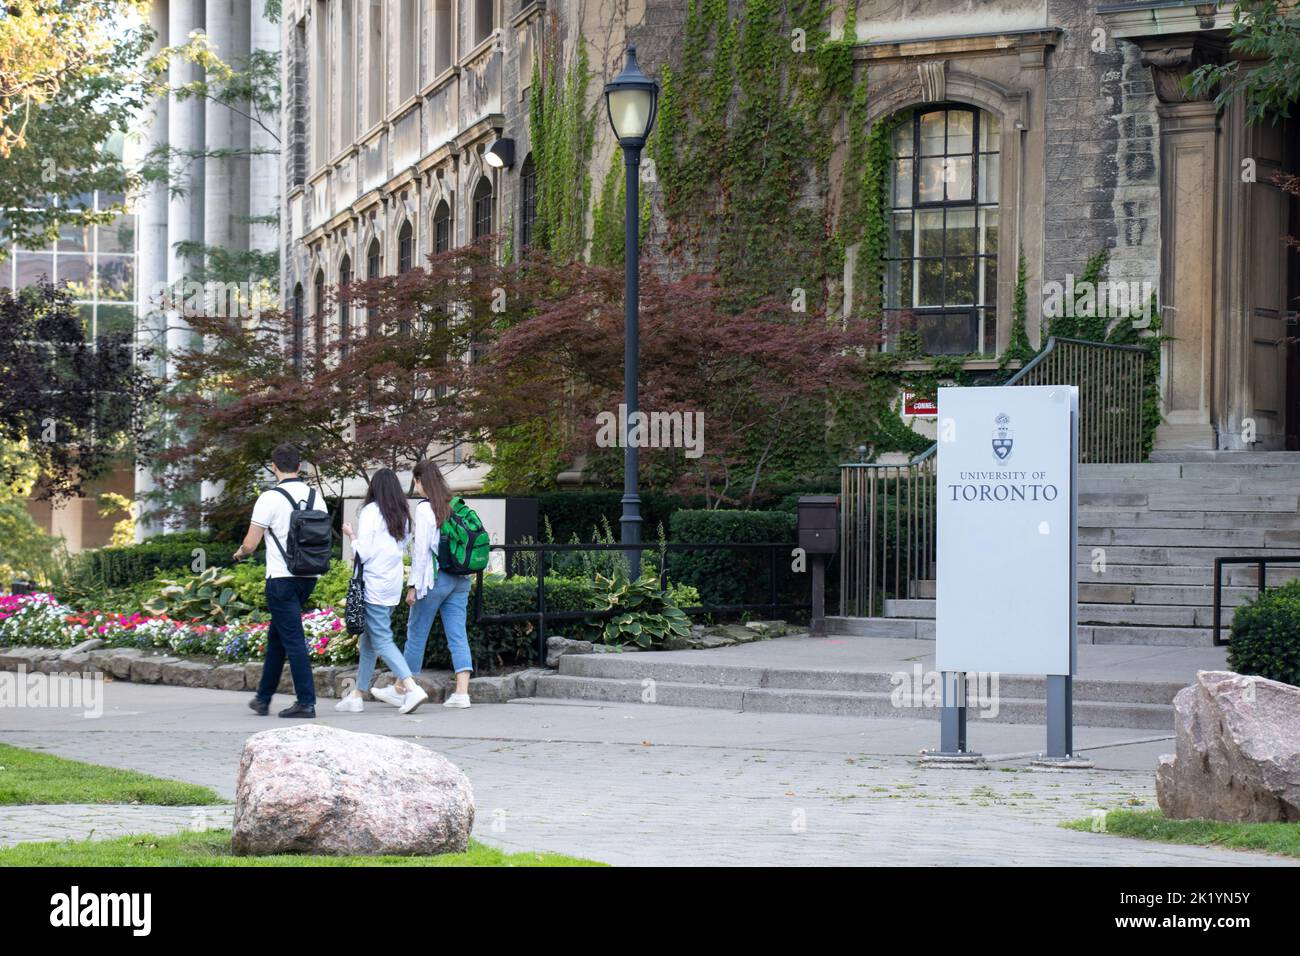 Students walk by a building with a sign for the University of Toronto, seen while on the campus on a sunny afternoon. Stock Photo